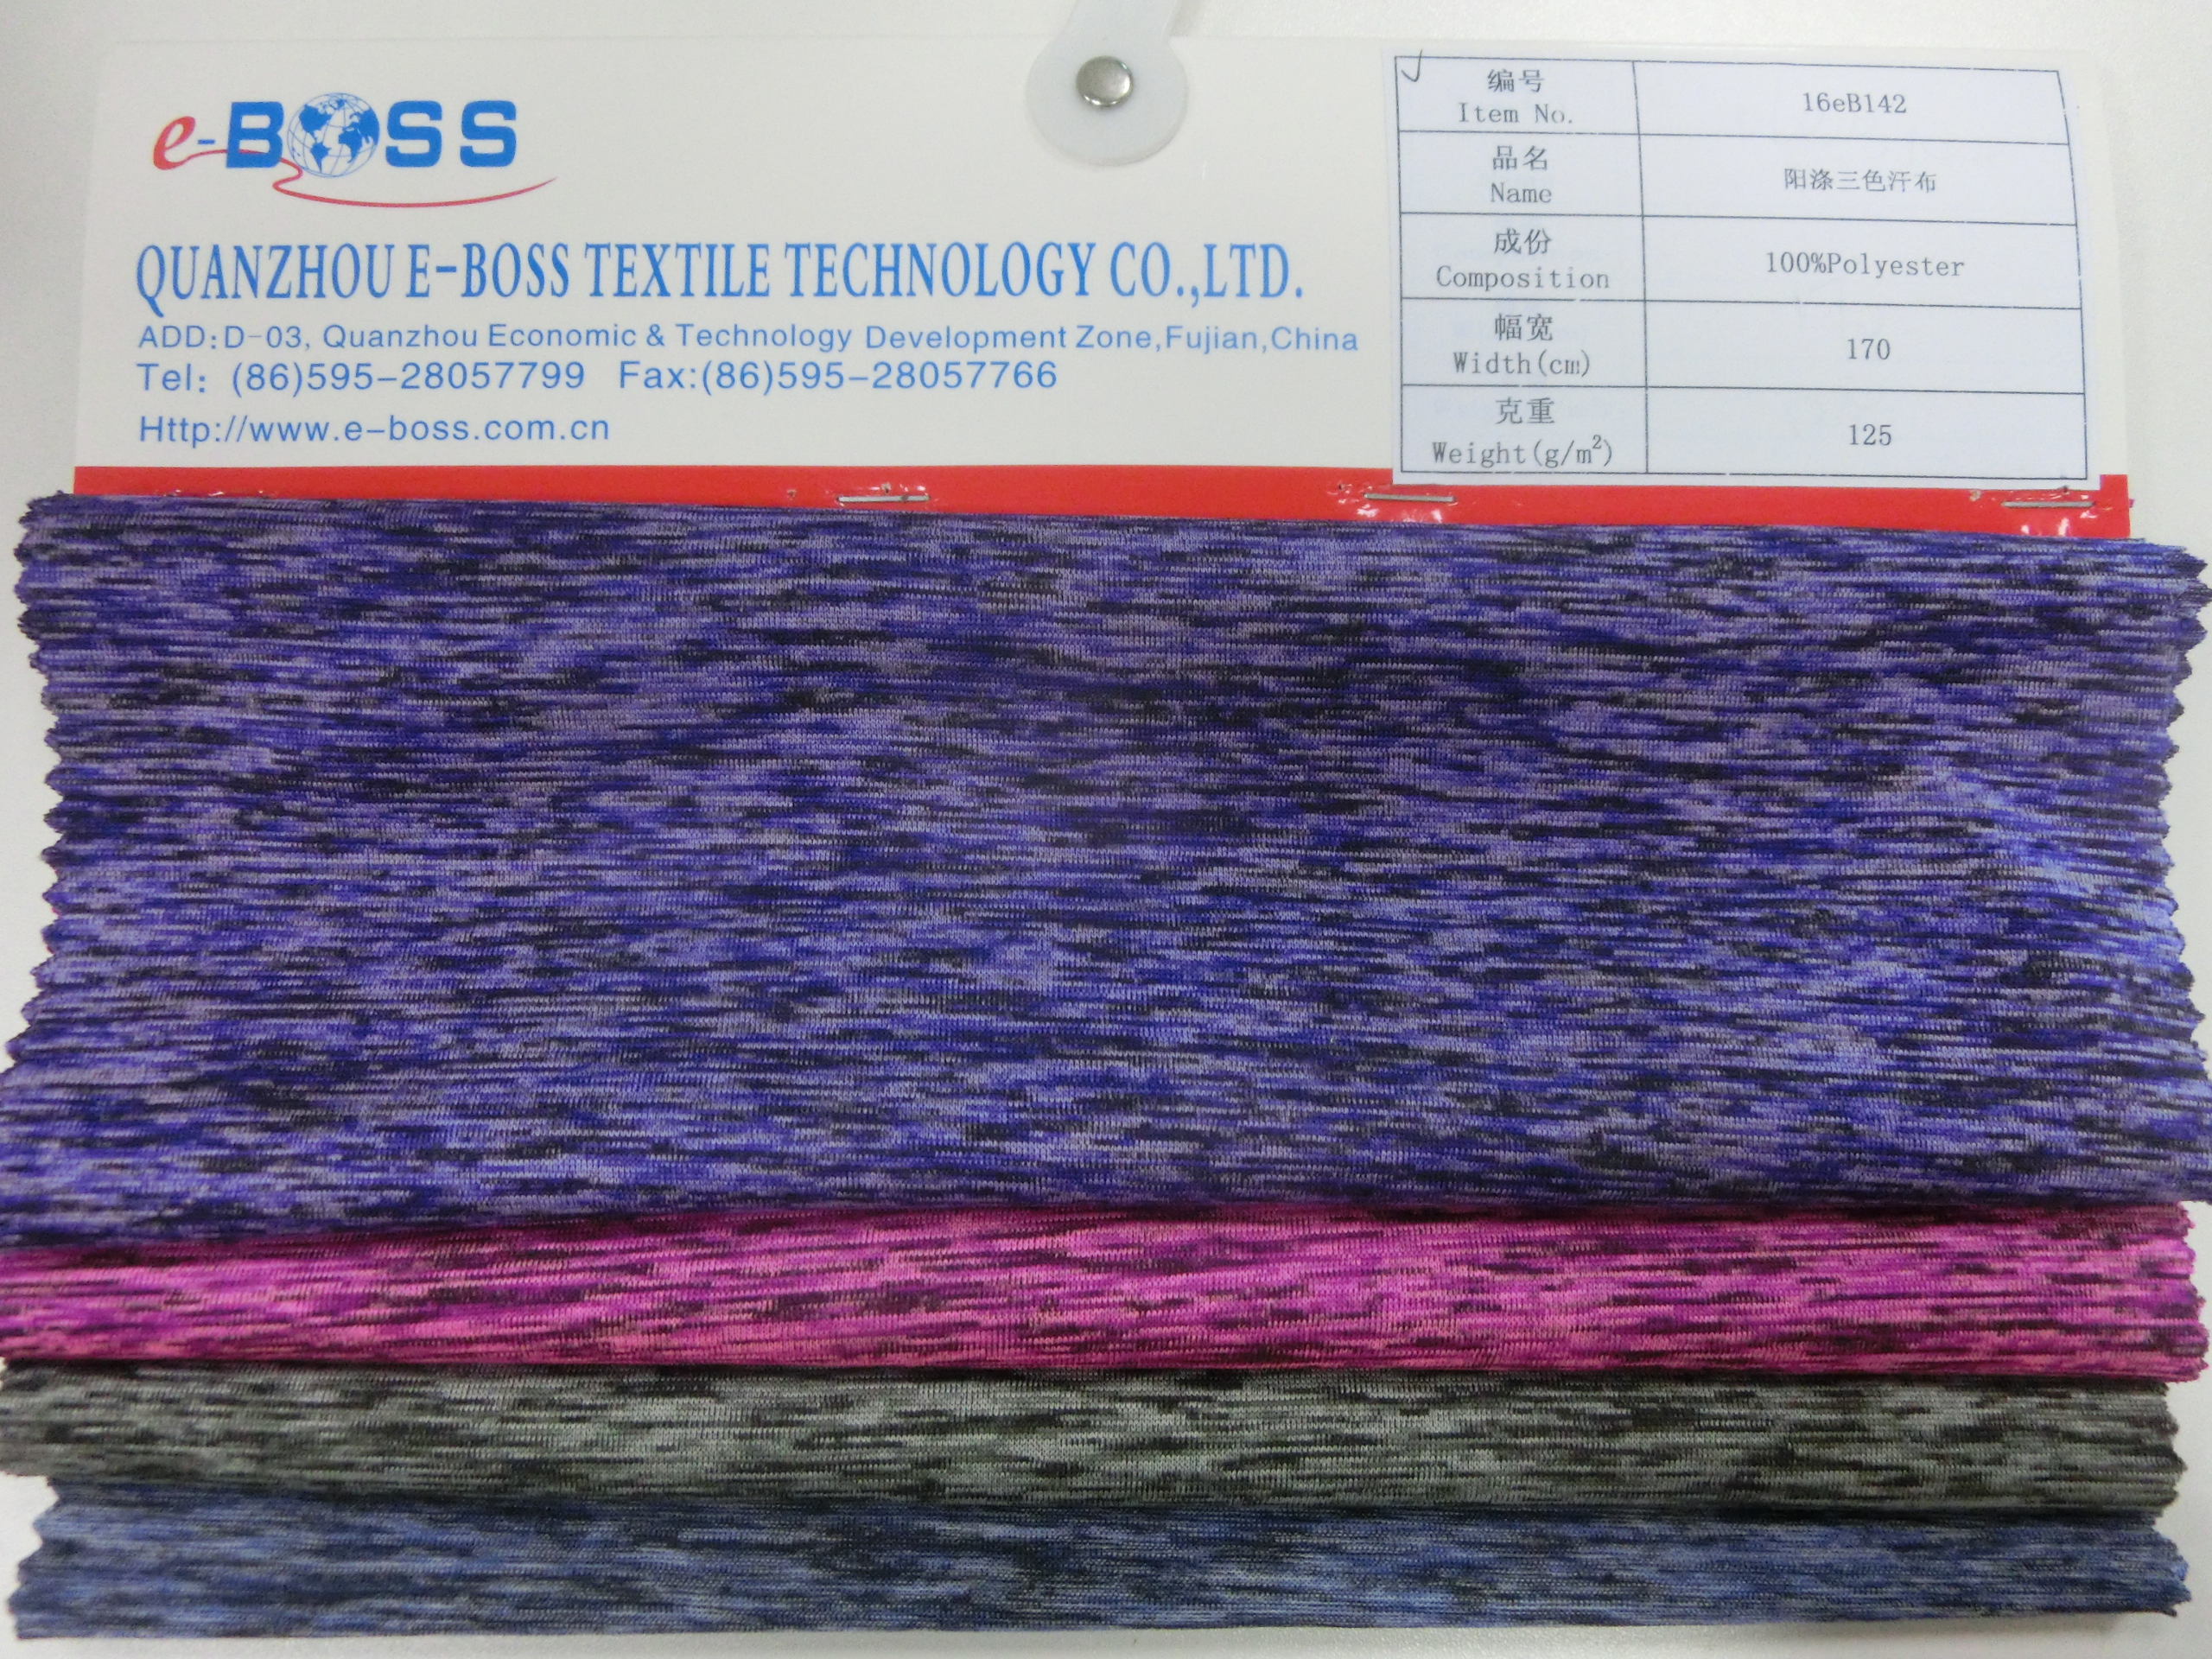 16eB142 100%Polyester Triple Mix Colors Single Jersey Fabric for running tops 170cmX125gm2